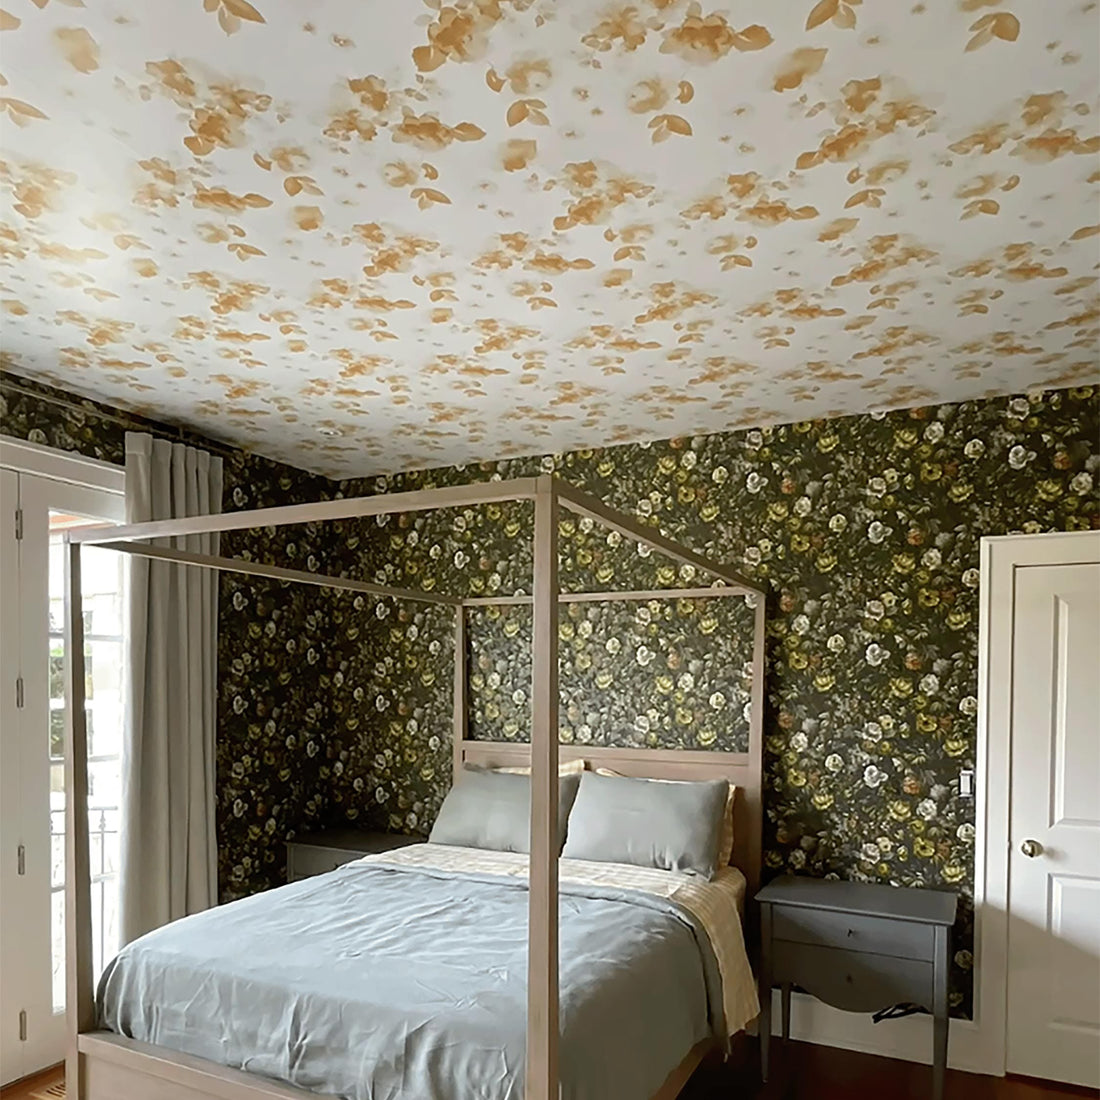 Ceiling Decals: Transform Your Fifth Wall into a Work of Art